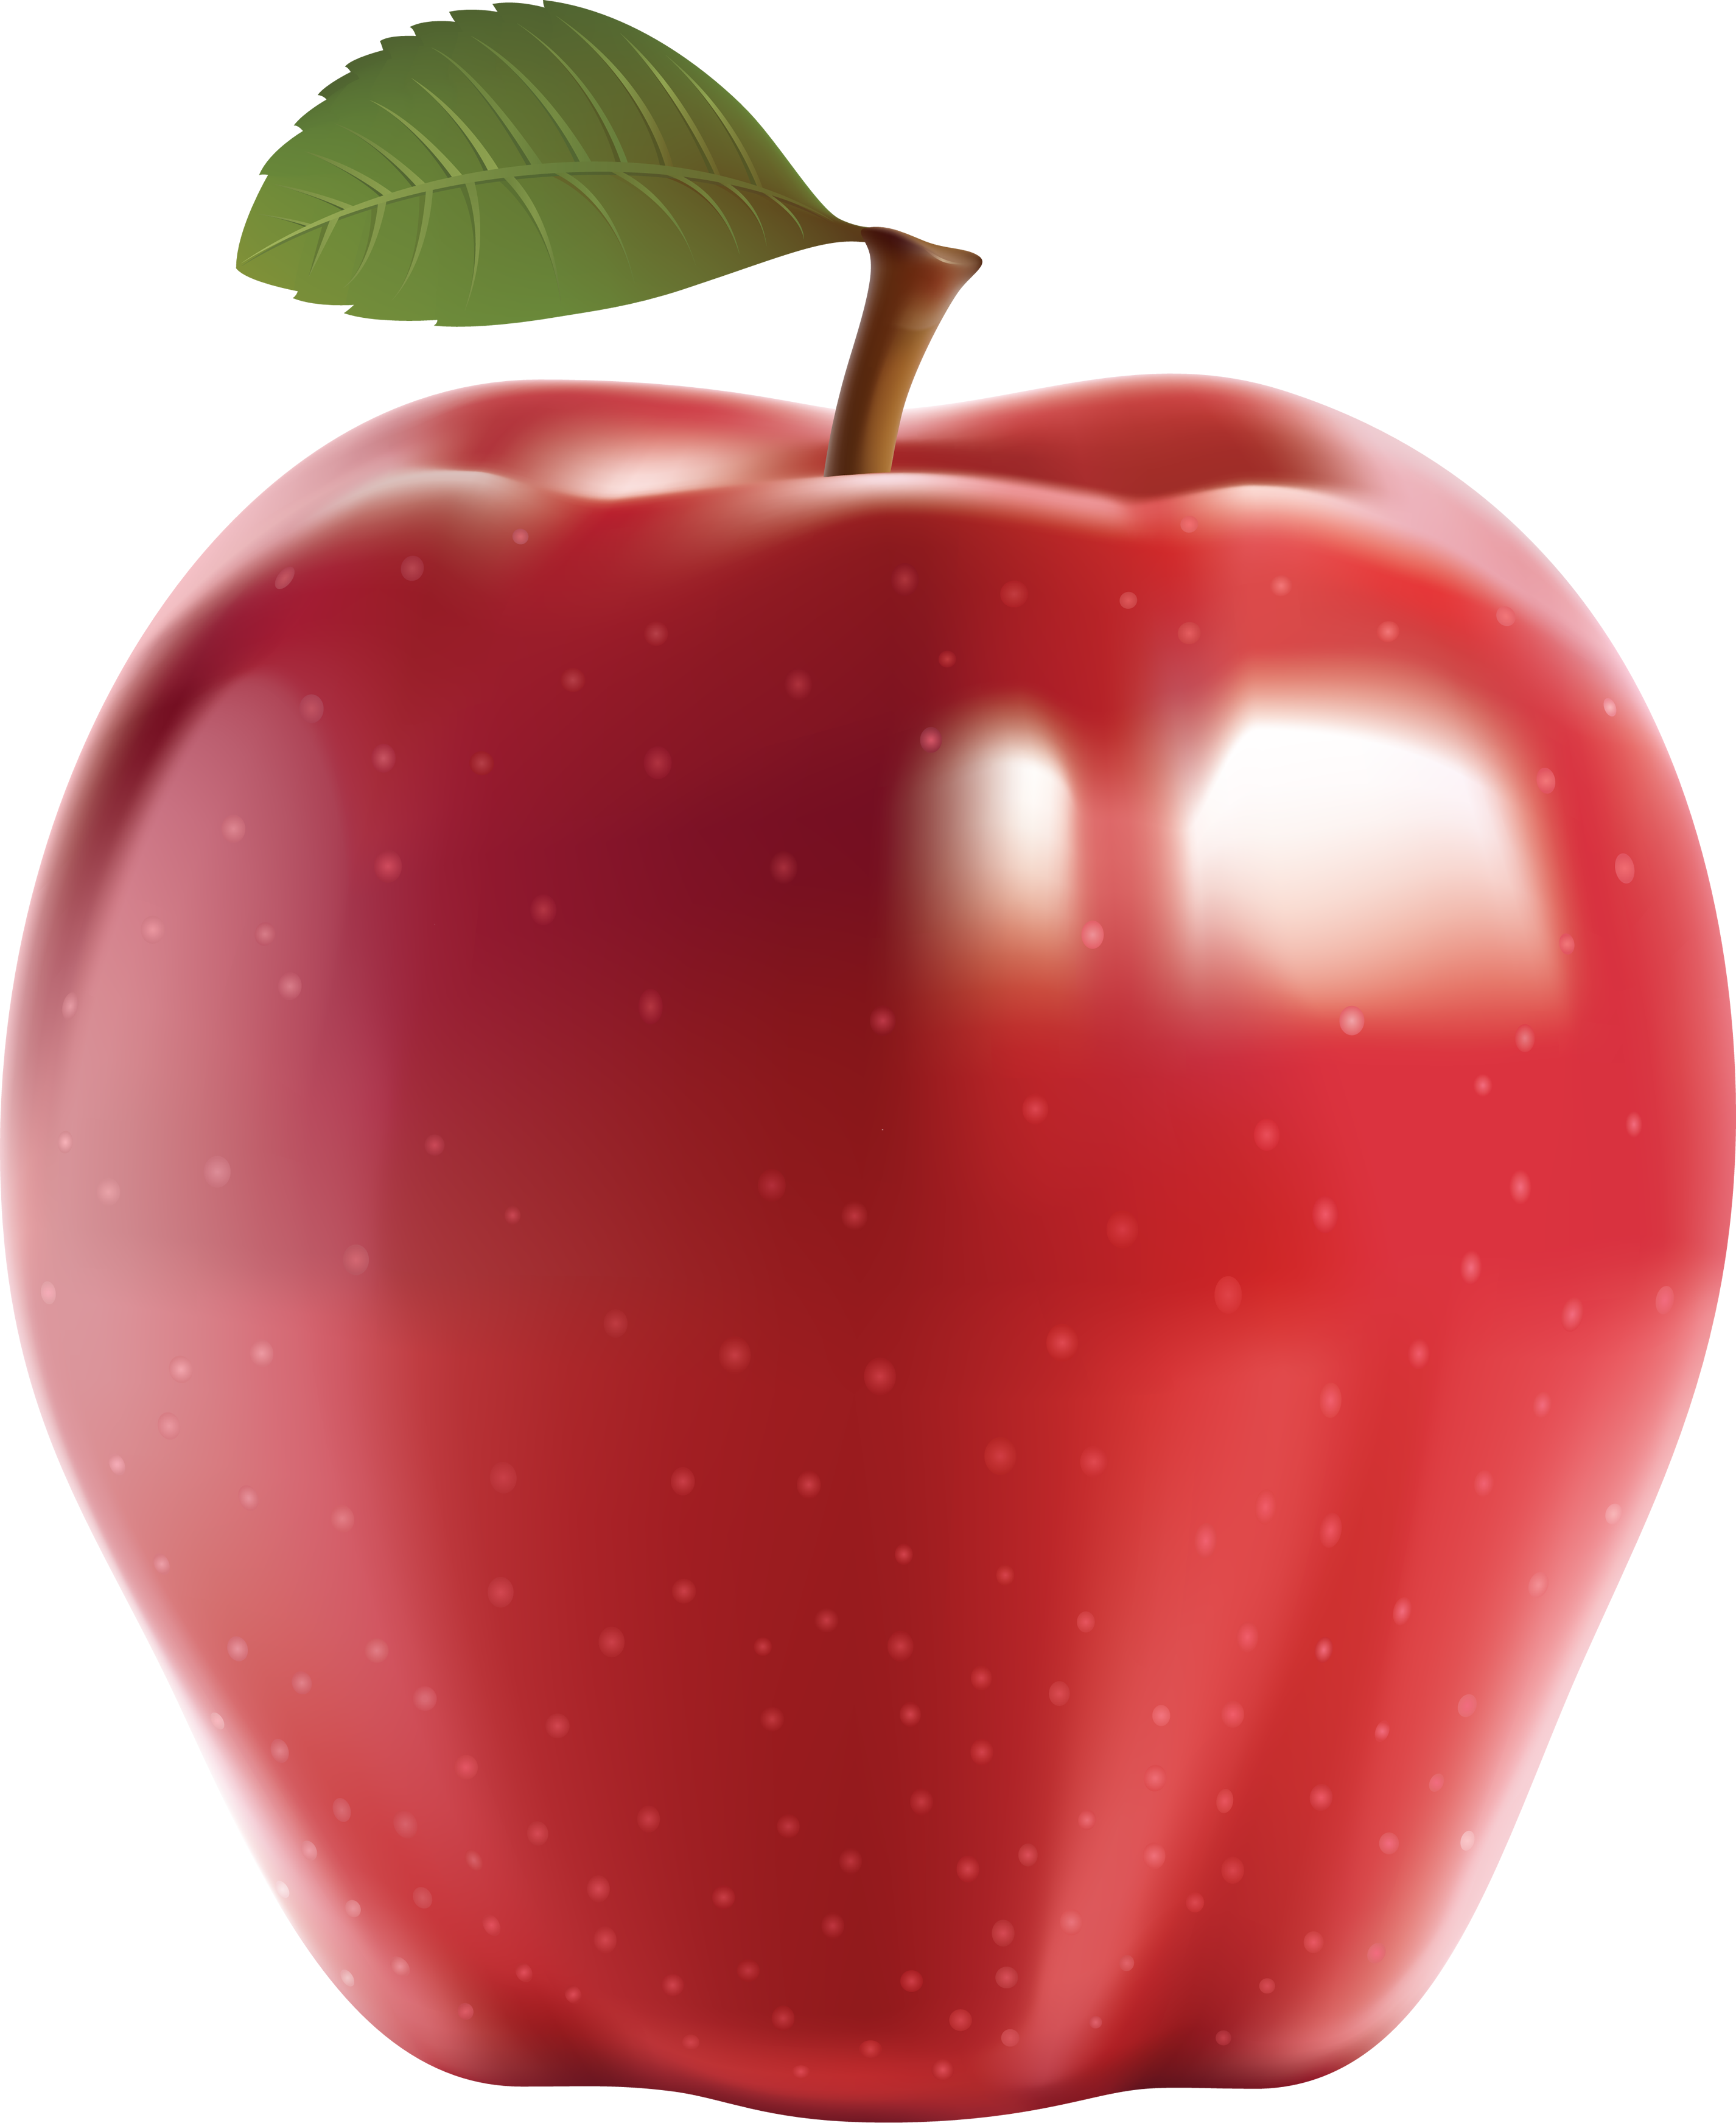 One Apple Png - Apple Png, Transparent background PNG HD thumbnail